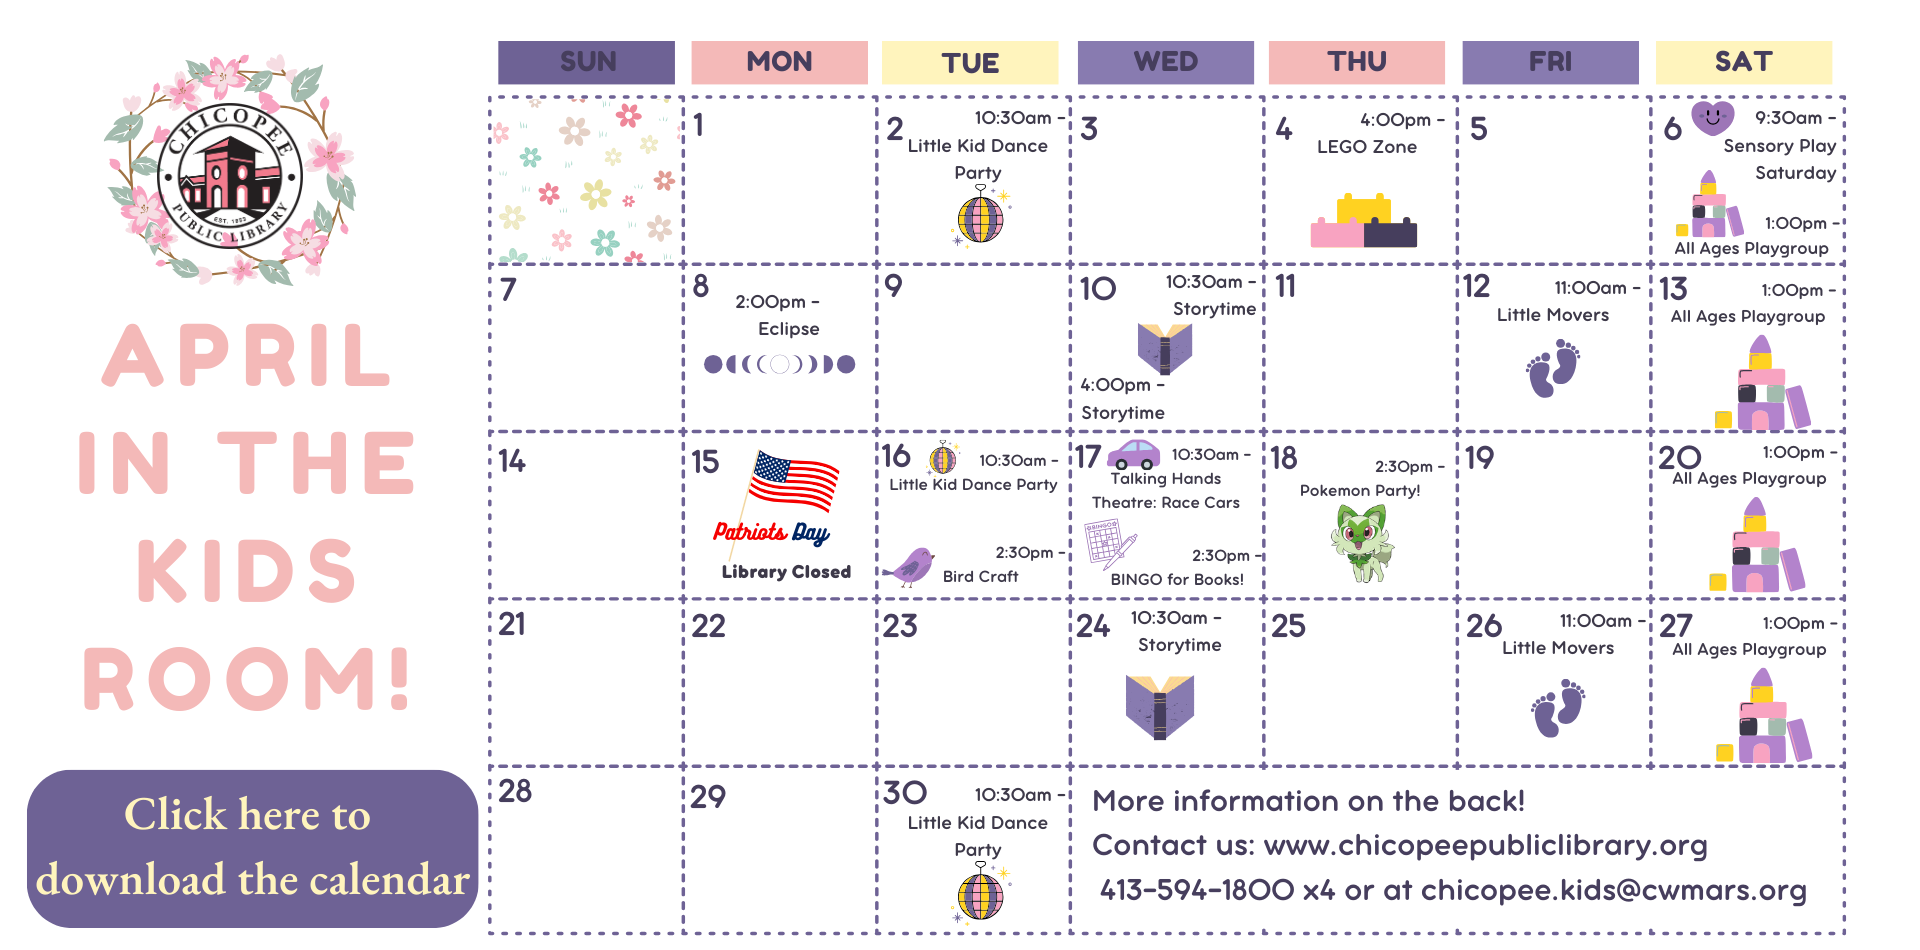 click here to download the kids april calendar